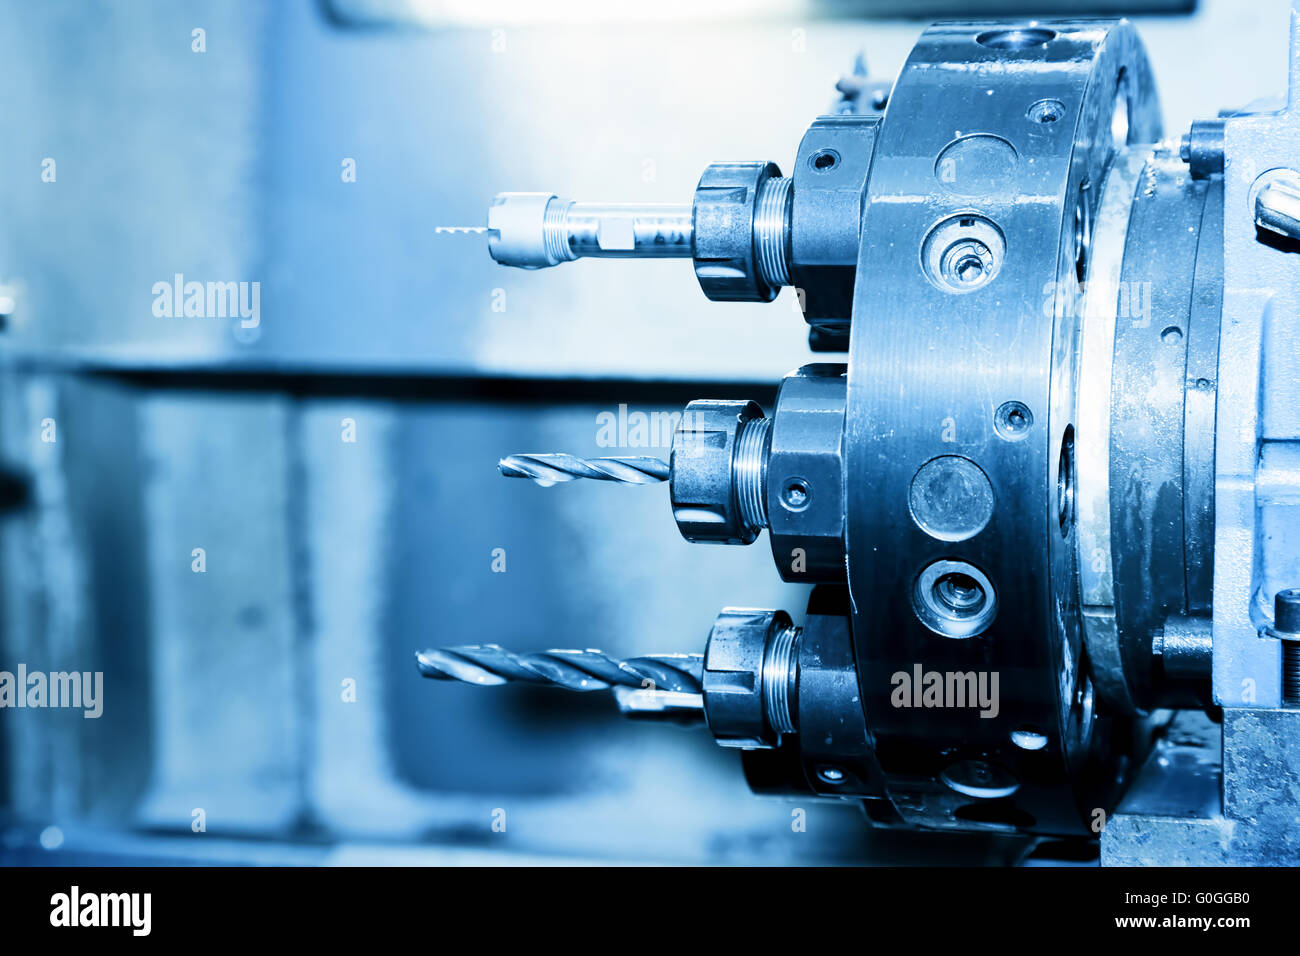 Industrial CNC drilling and boring machine close-up. Stock Photo